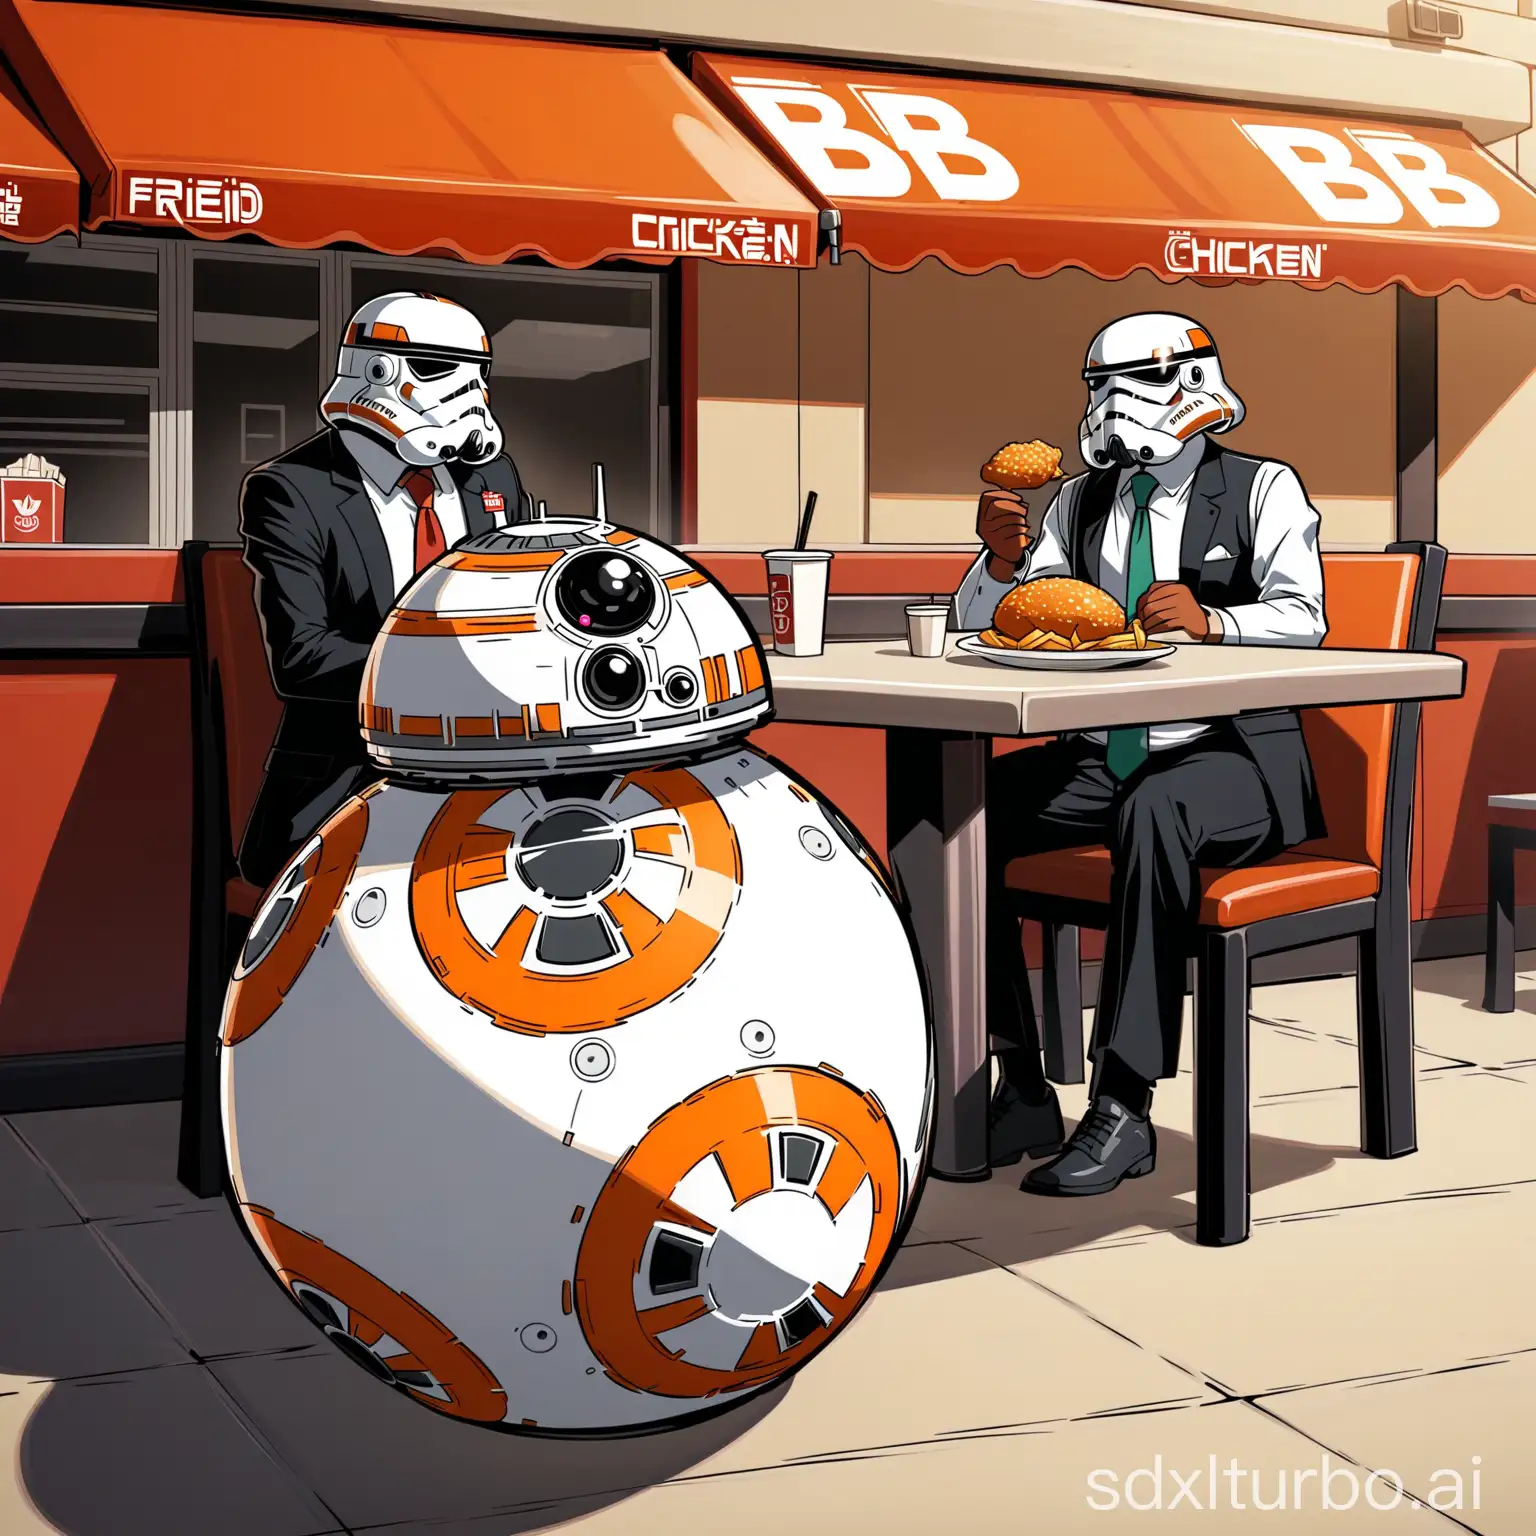 Two BB8s wearing ties are eating fried chicken at a fried chicken restaurant